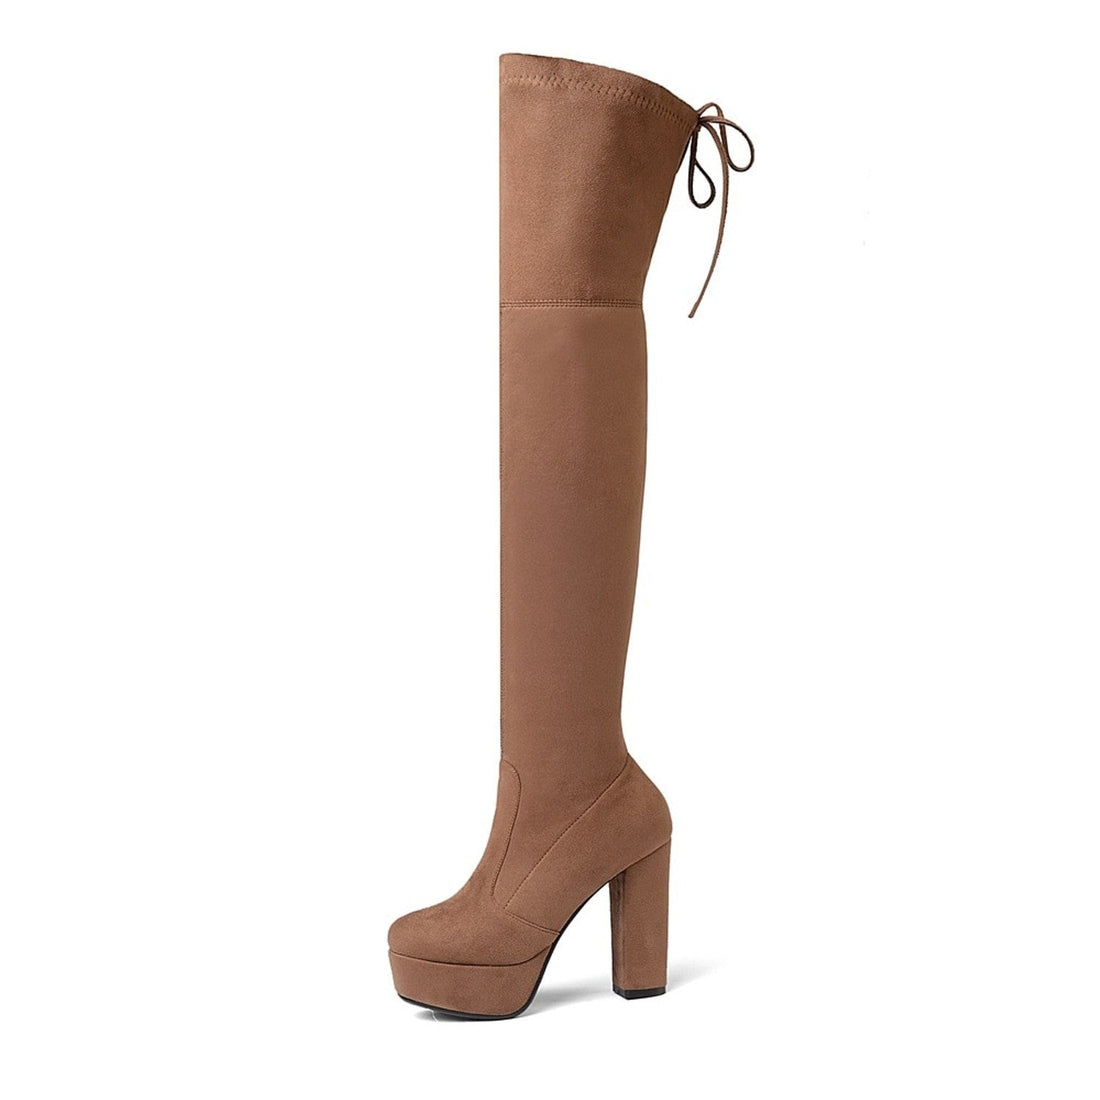 Women's Winter Faux Suede High Boots